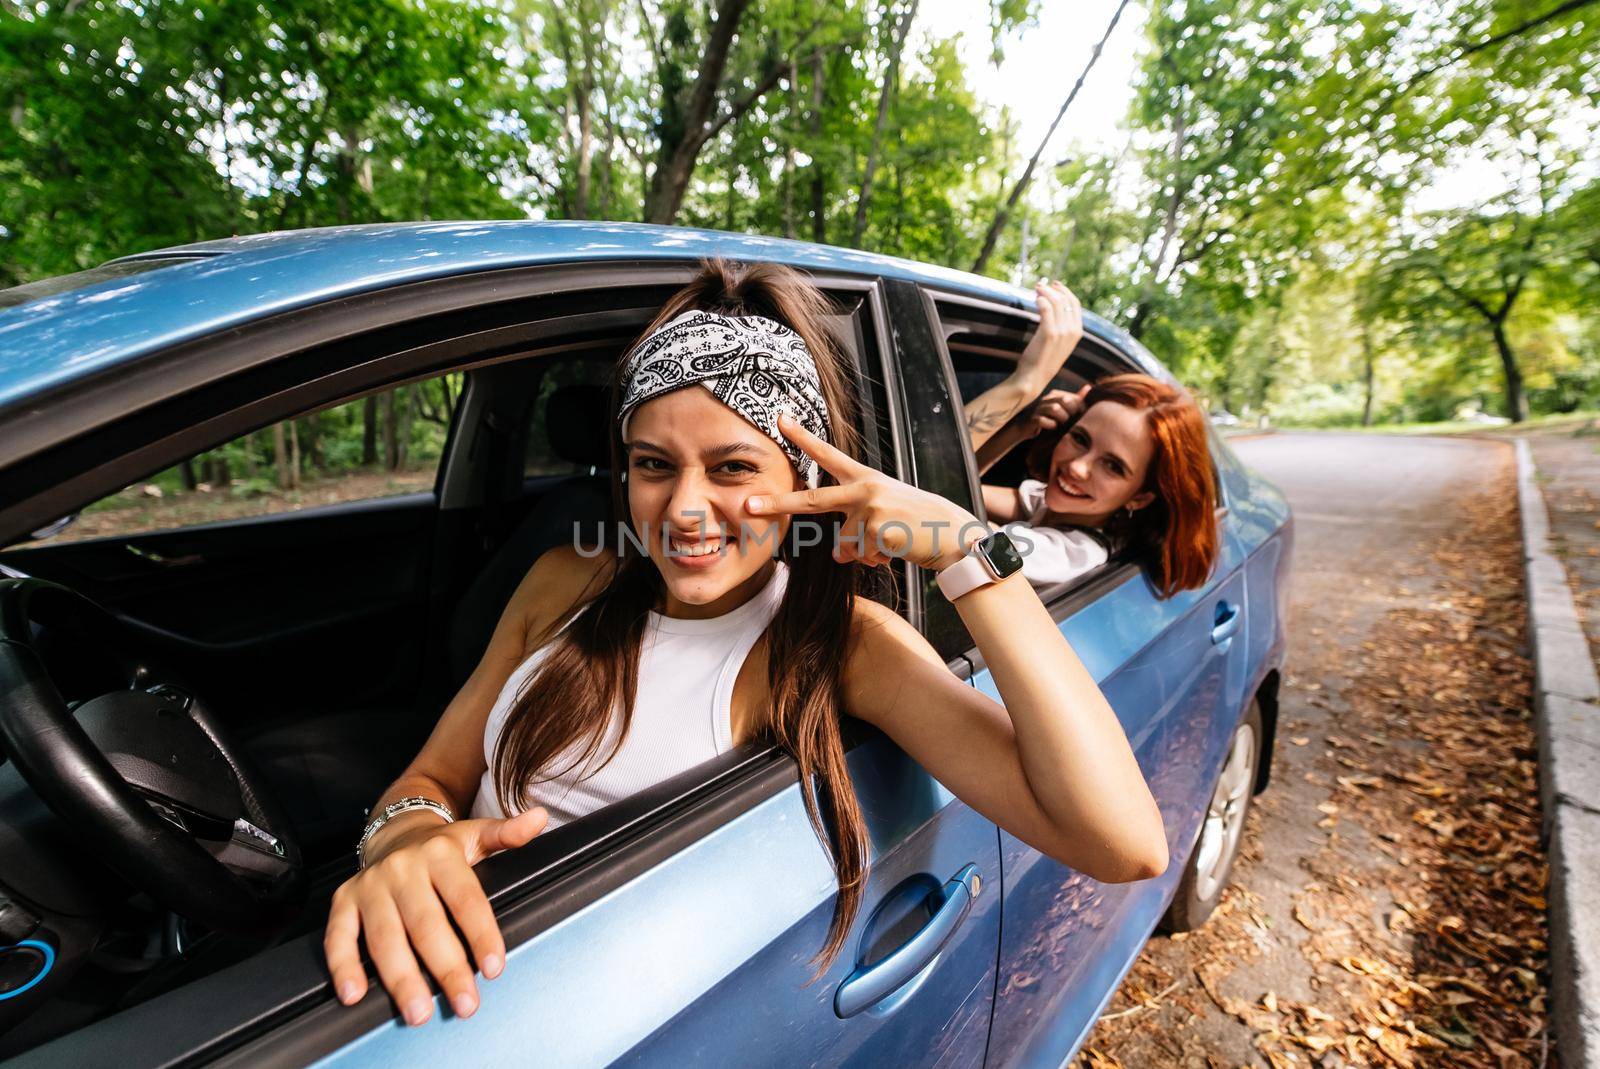 Two attractive young girlfriends fool around and laughing together in a car on a sunny day.